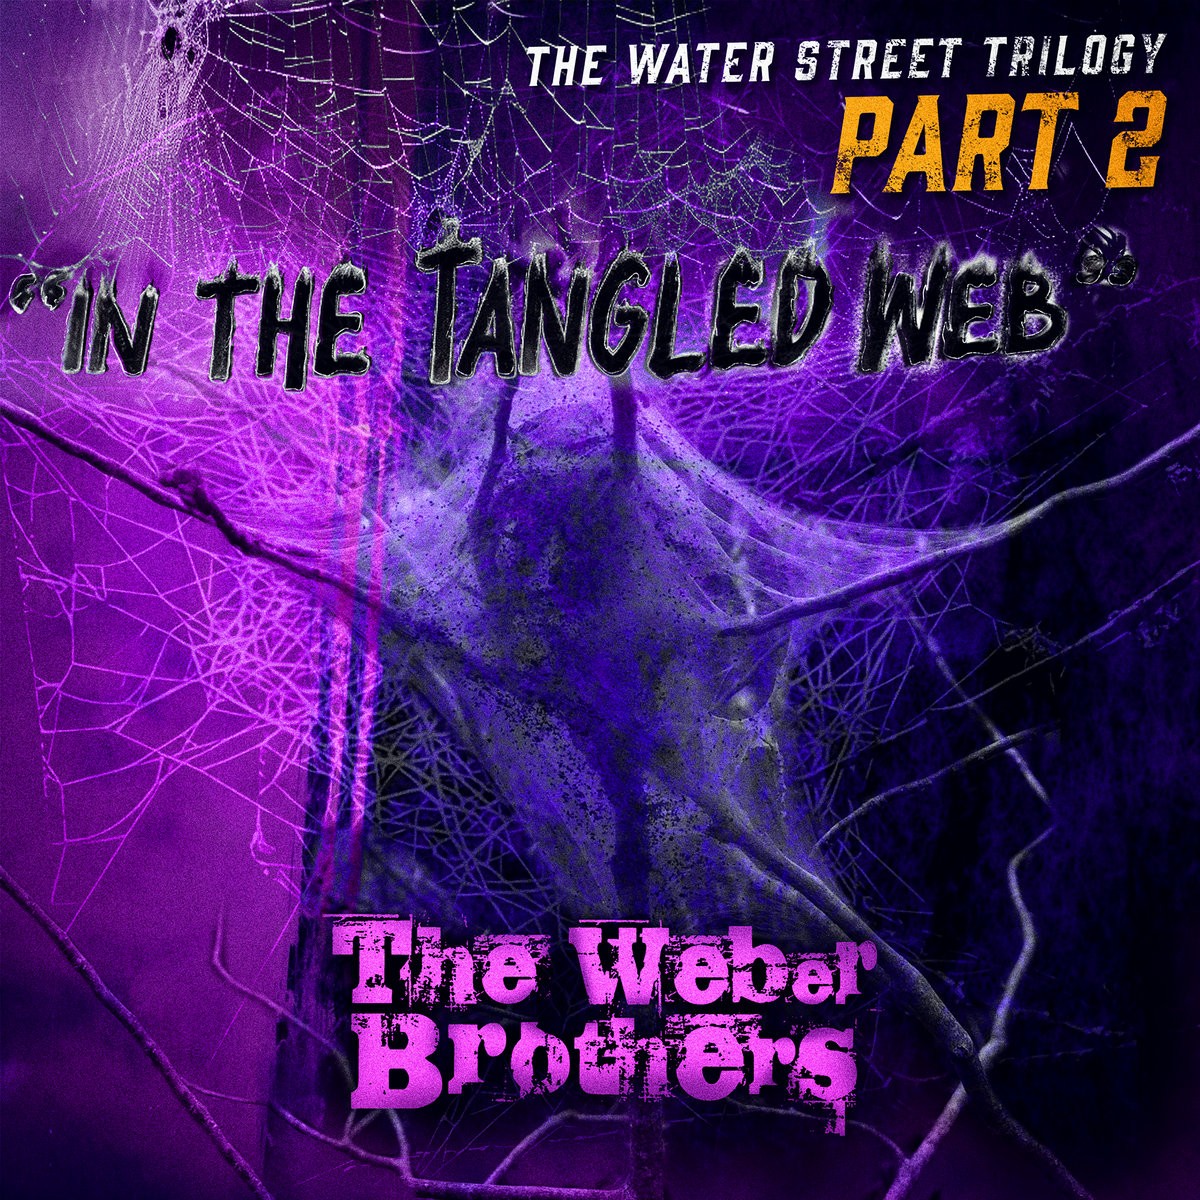 The Weber Brothers - The Water Street Trilogy Part 2 – In The Tangled Web